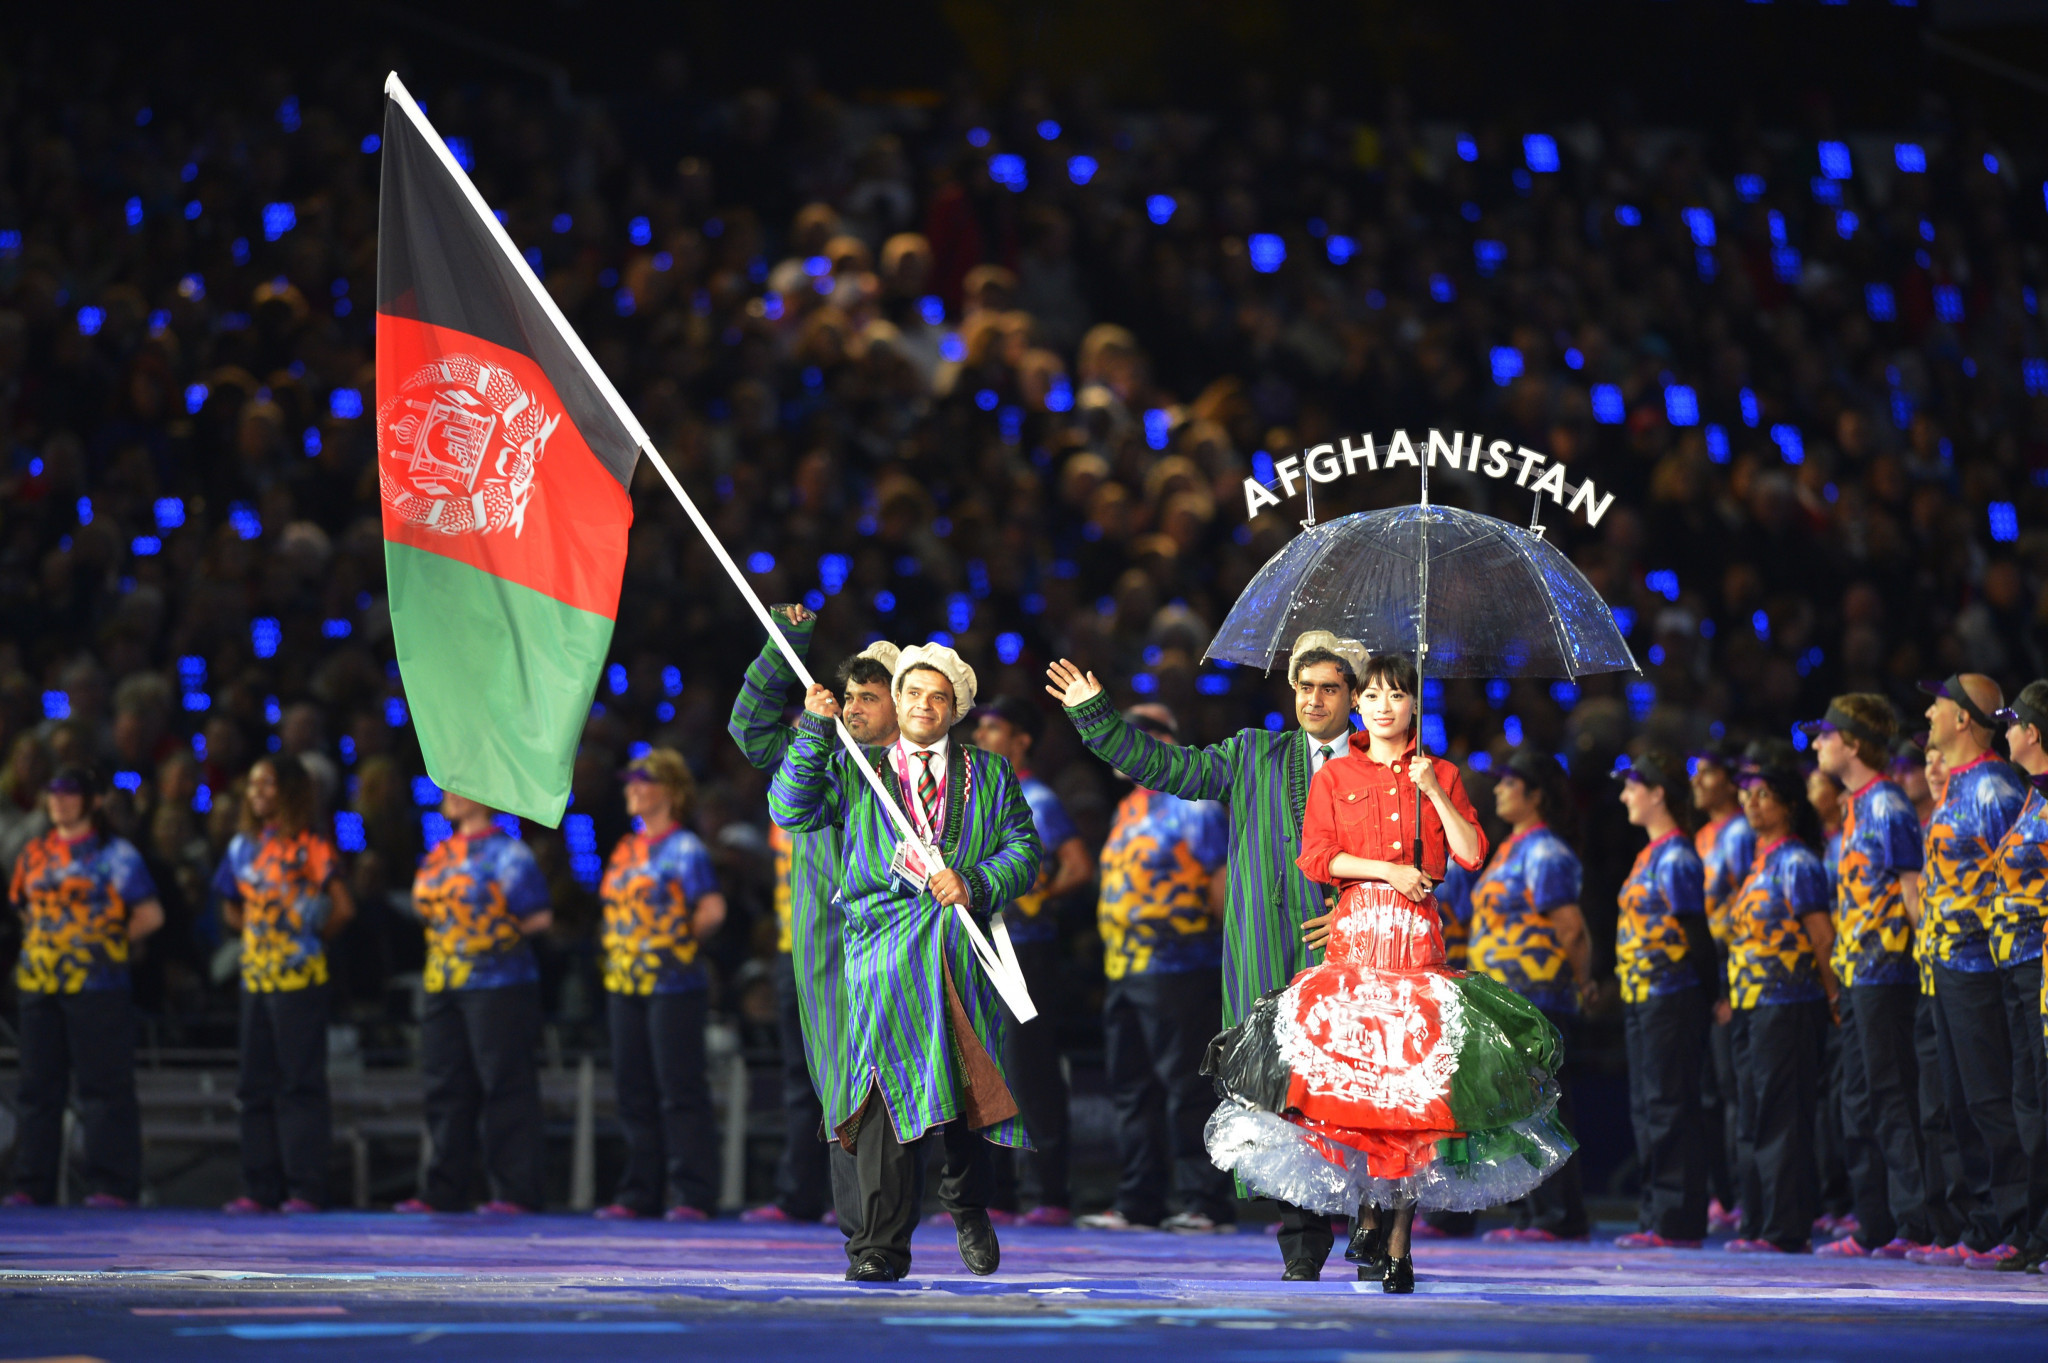 Zakia Khudadadi in Para taekwondo had been due to become Afghanistan's first female athlete to appear at a Paralympics at Tokyo 2020, but the Taliban's resurgence has brought serious concerns over what it will mean for women's rights in the country ©Getty Images